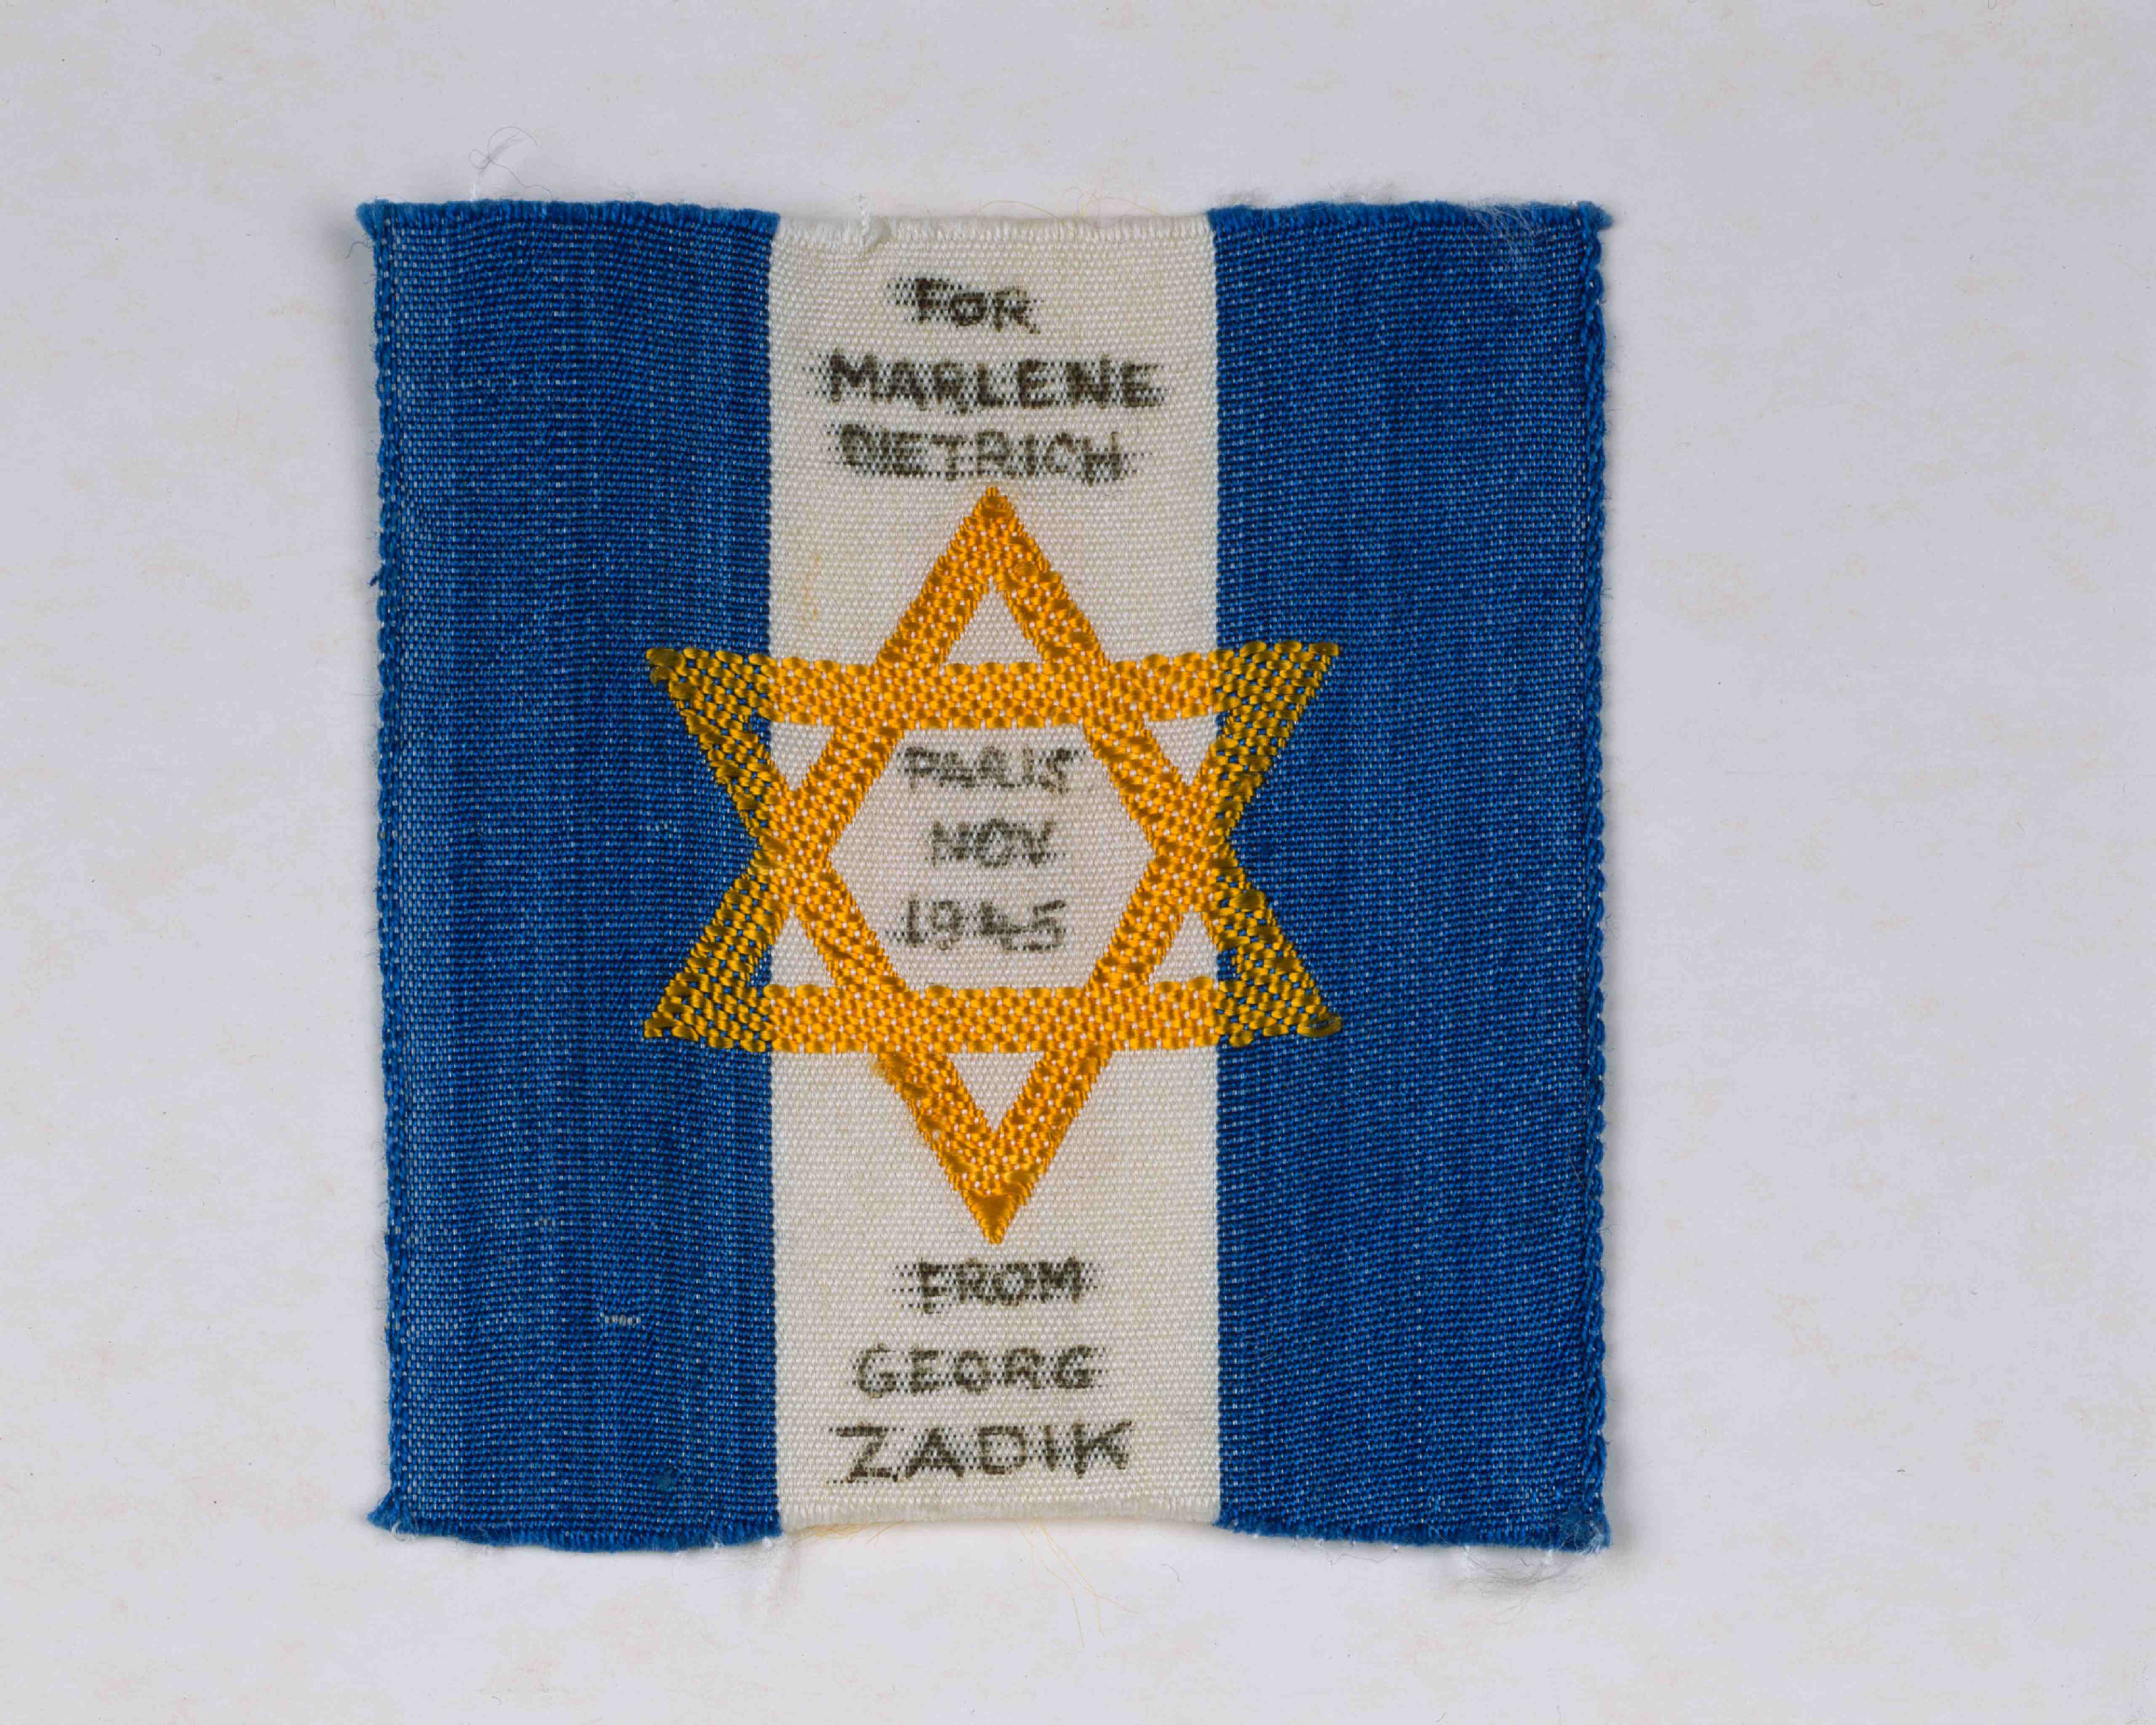 Fan gift to Marlene Dietrich: Badge with a Star of David and the dedication "For Marlene Dietrich – Paris Nov. 1945 – from Georg Zadik"